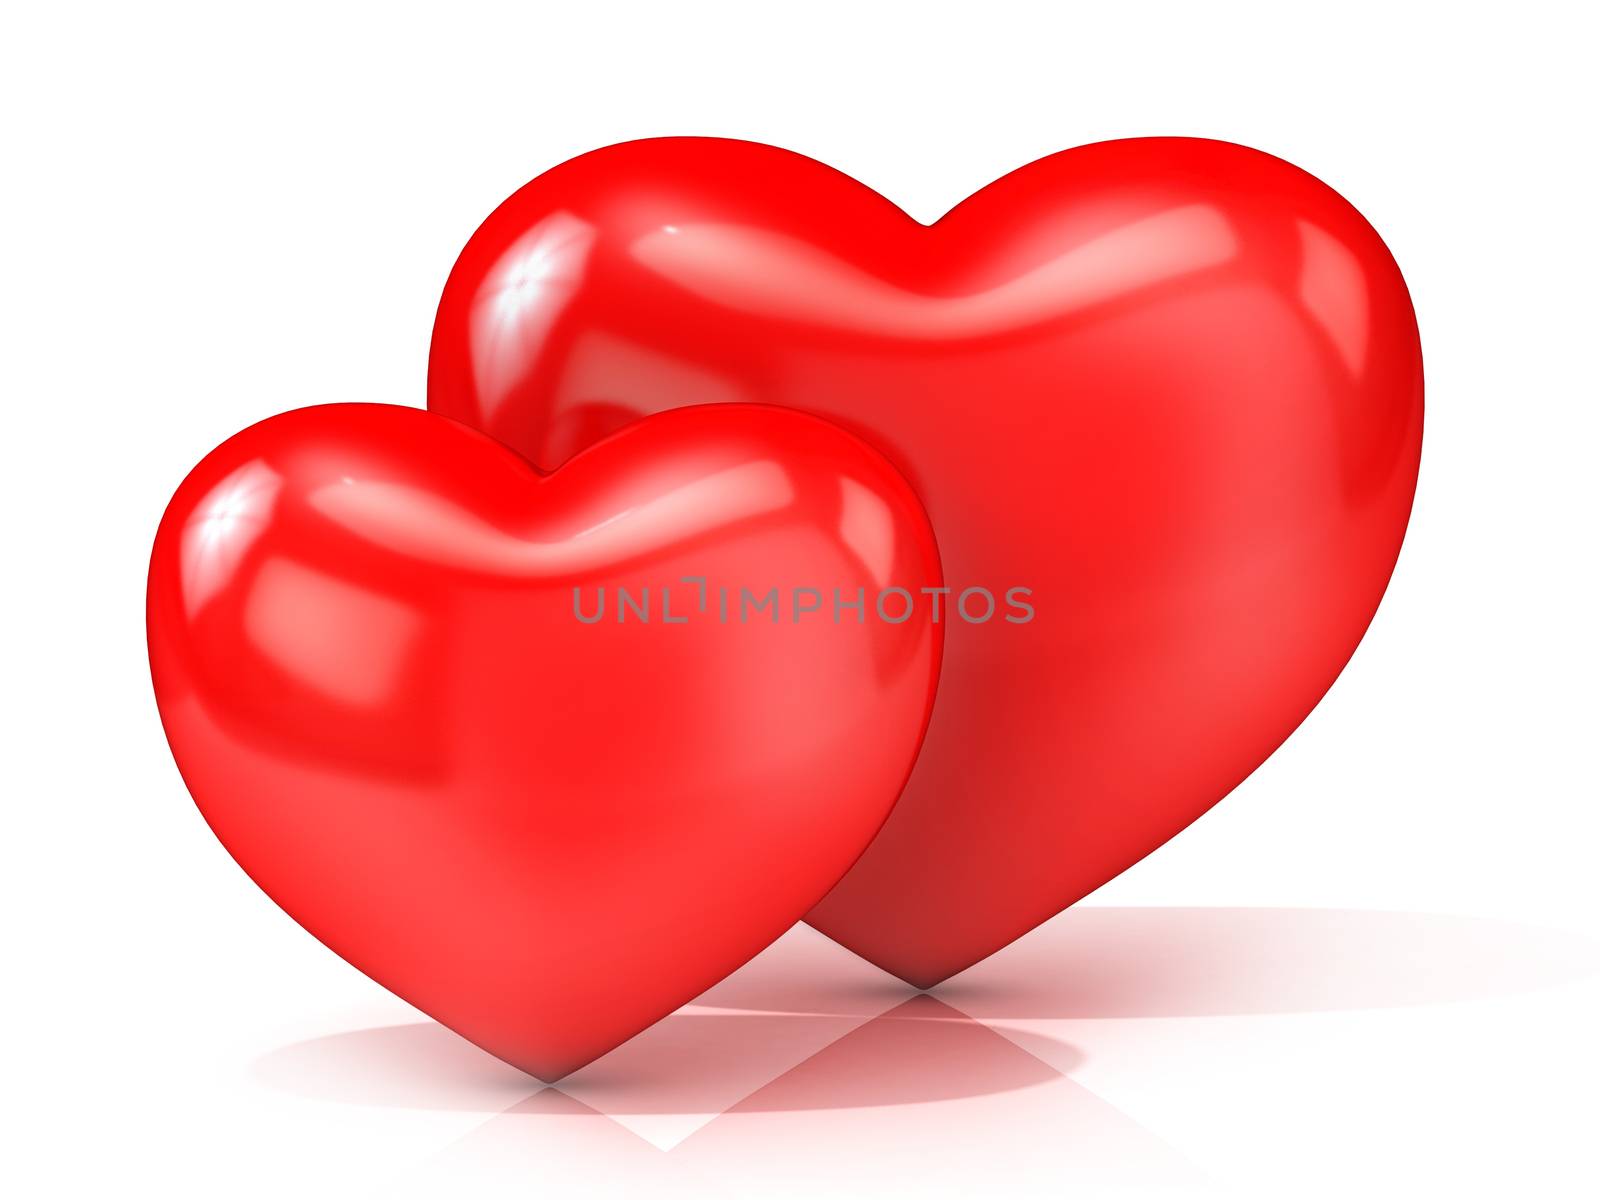 Two red hearts. 3D render illustration isolated on white background. Front view